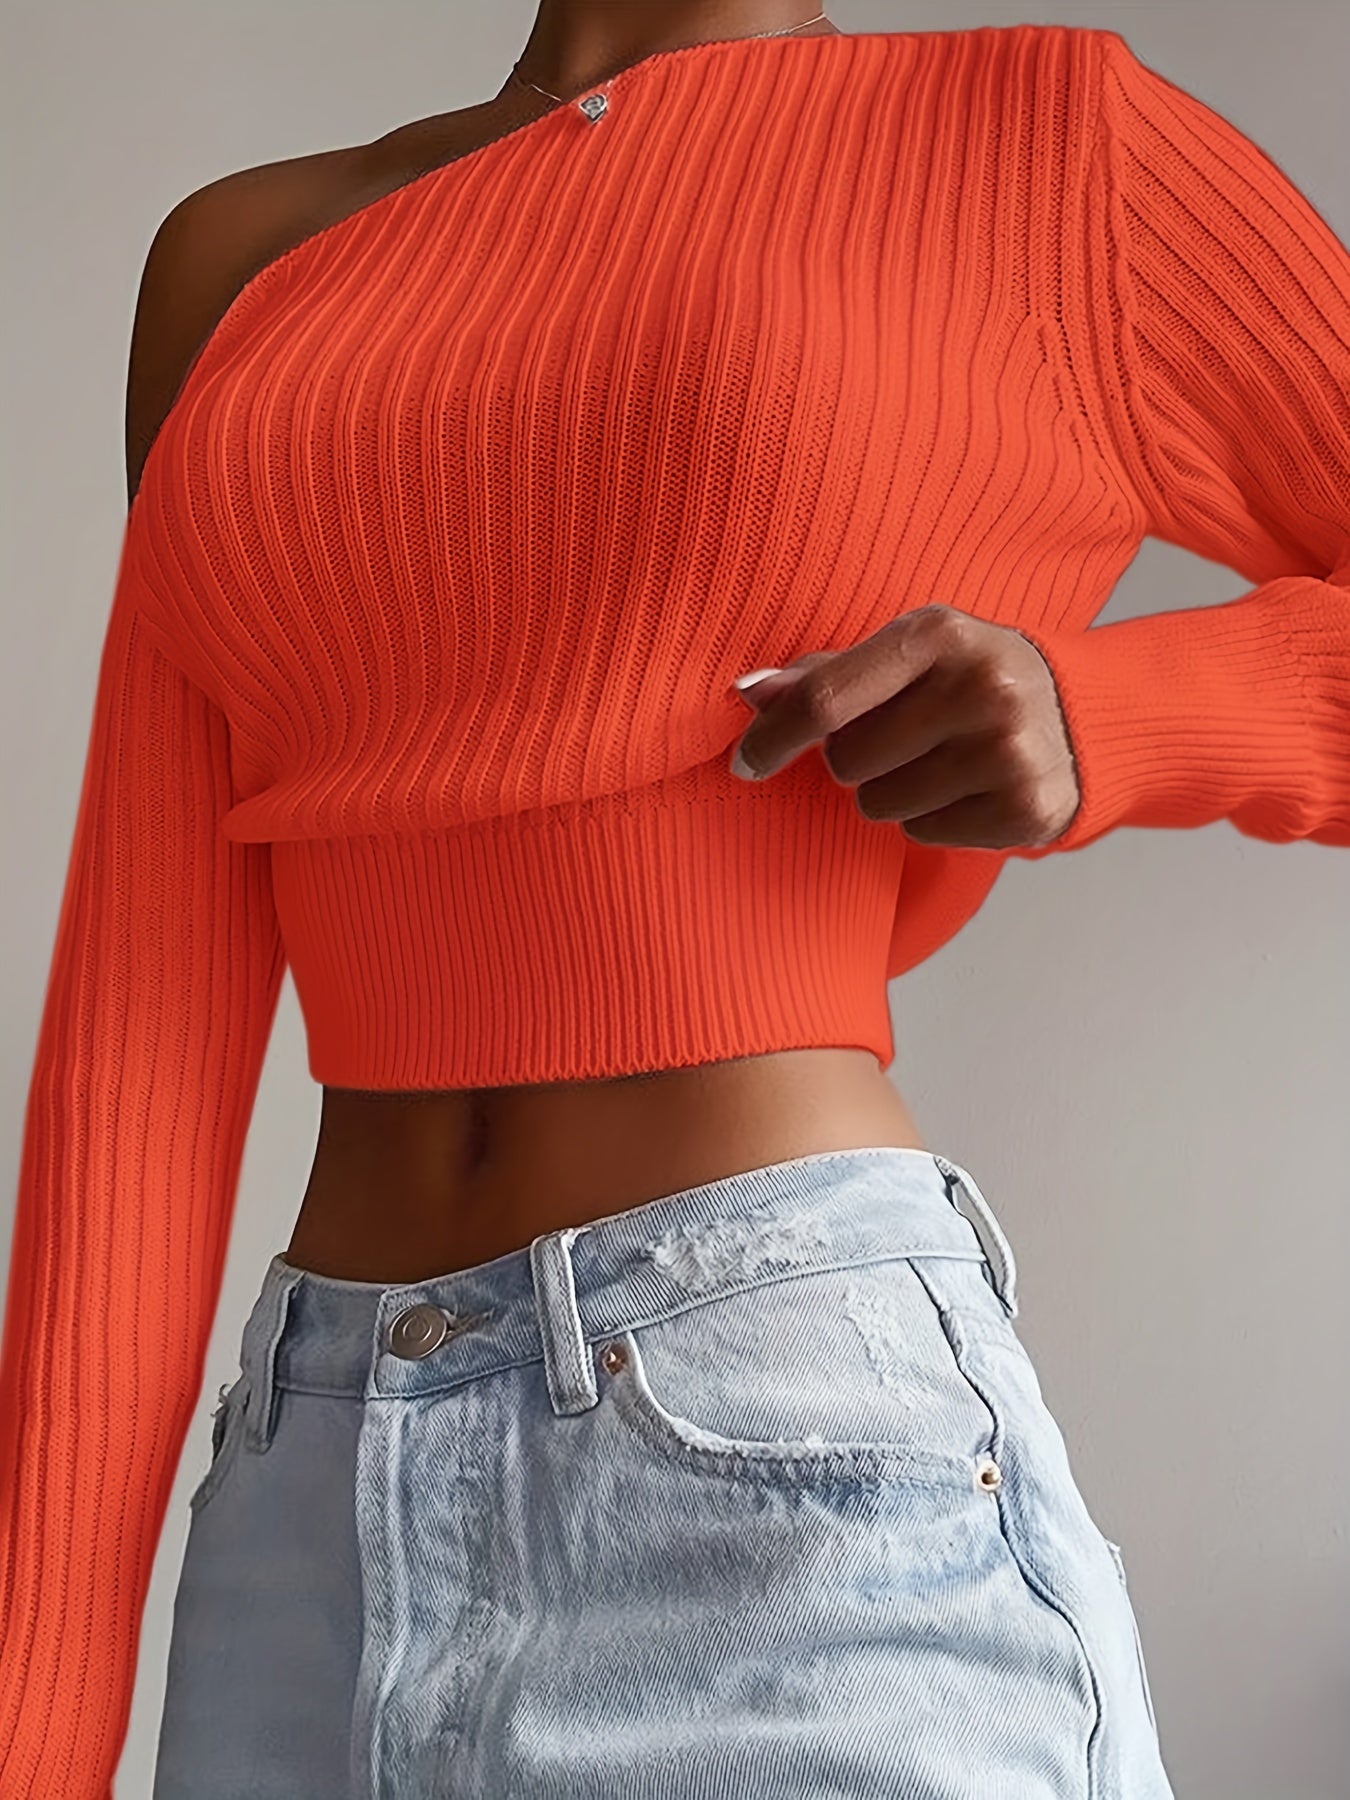 Antmvs Ribbed Asymmetrical Neck Knit Crop Sweater, Sexy Cold Shoulder Long Sleeve Pullover Sweater, Women's Clothing